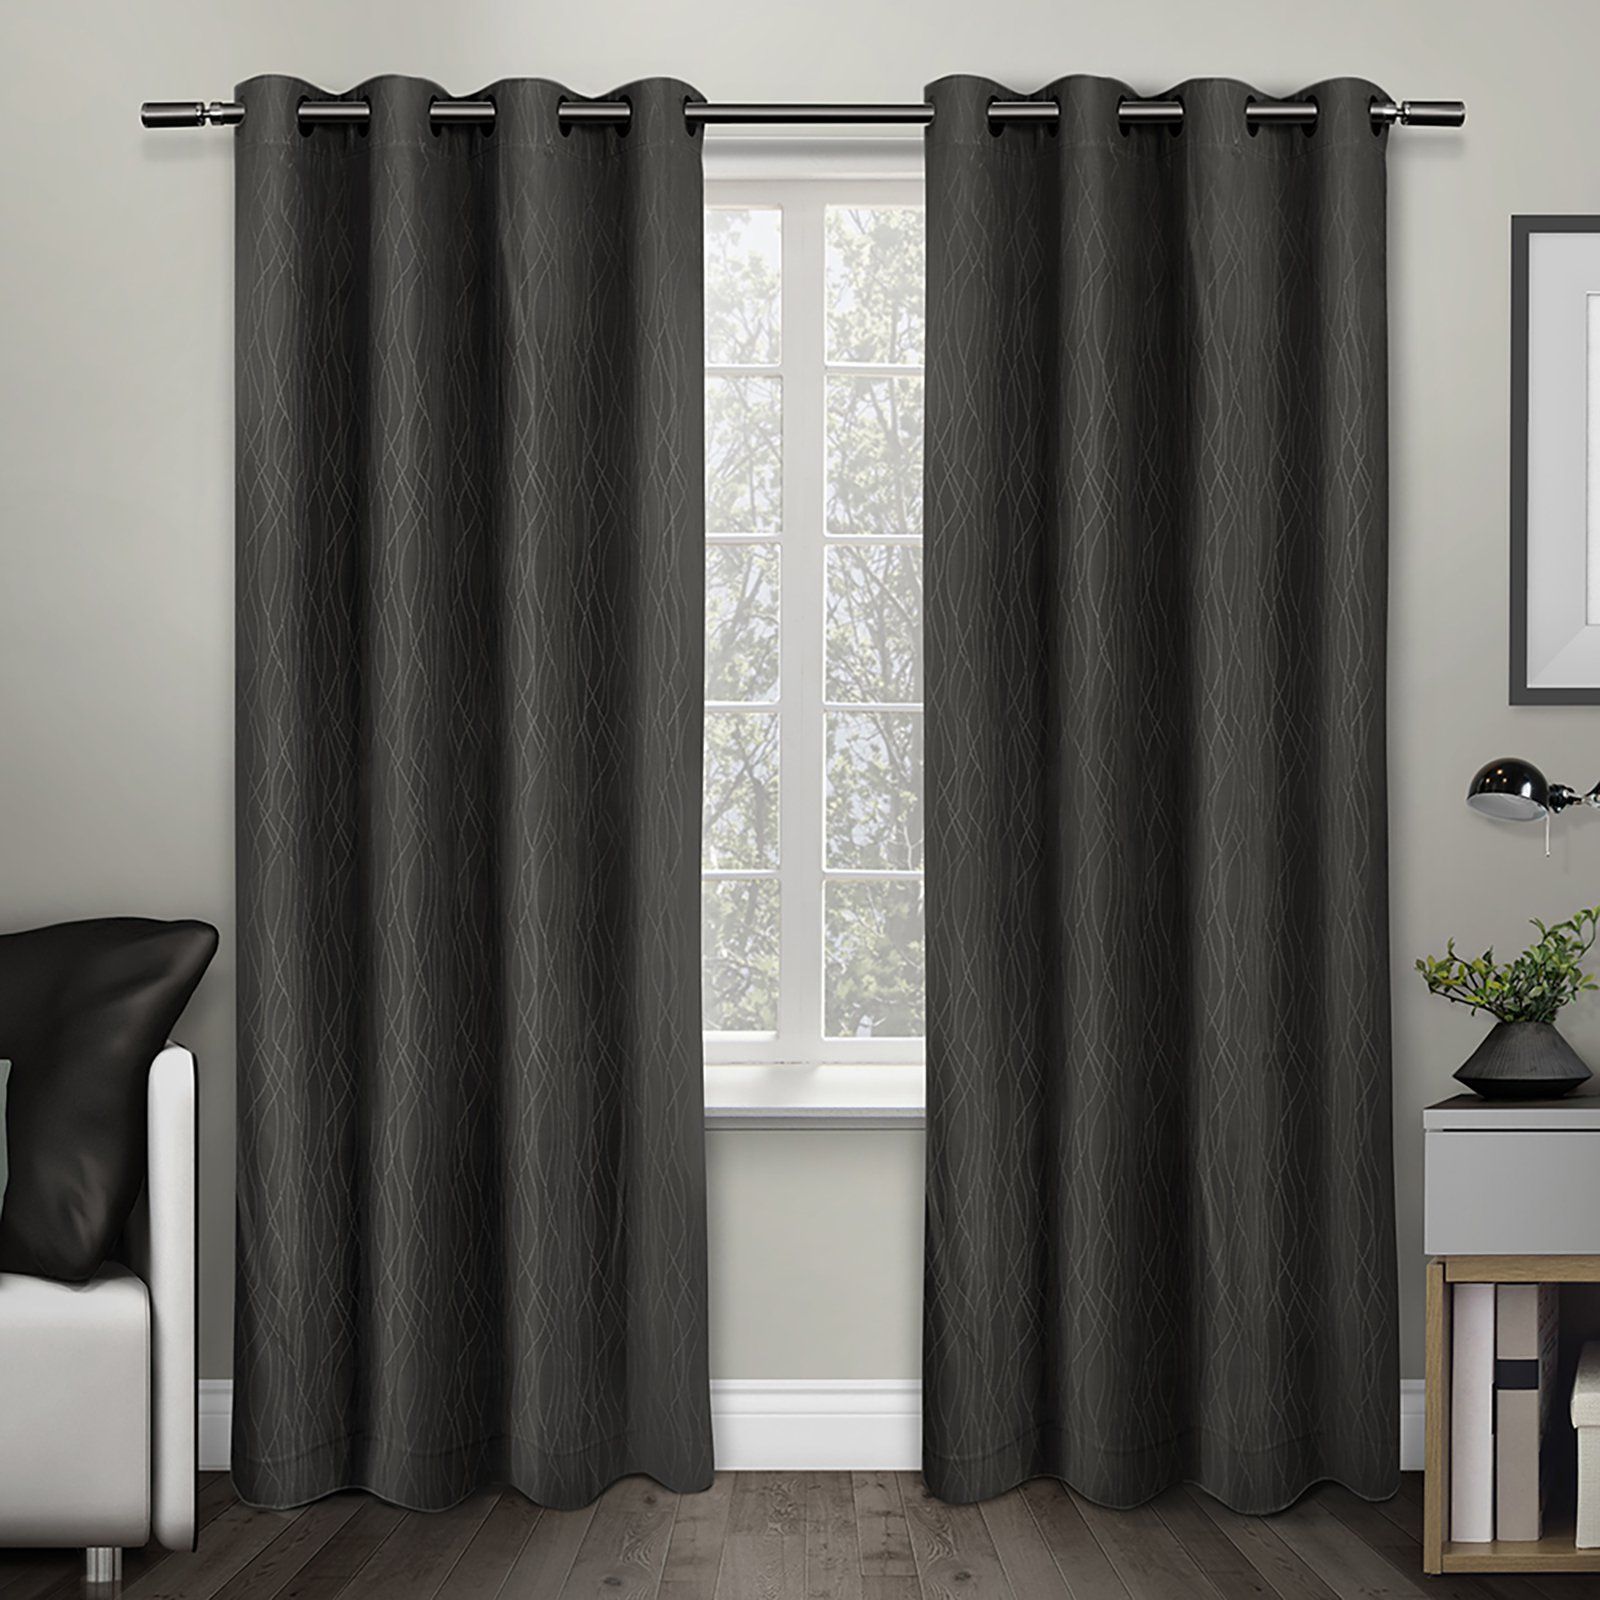 Exclusive Home Crete Textured Jacquard Thermal Window Curtain Panel Pair  With Grommet Top With Regard To Antique Silver Grommet Top Thermal Insulated Blackout Curtain Panel Pairs (View 11 of 20)